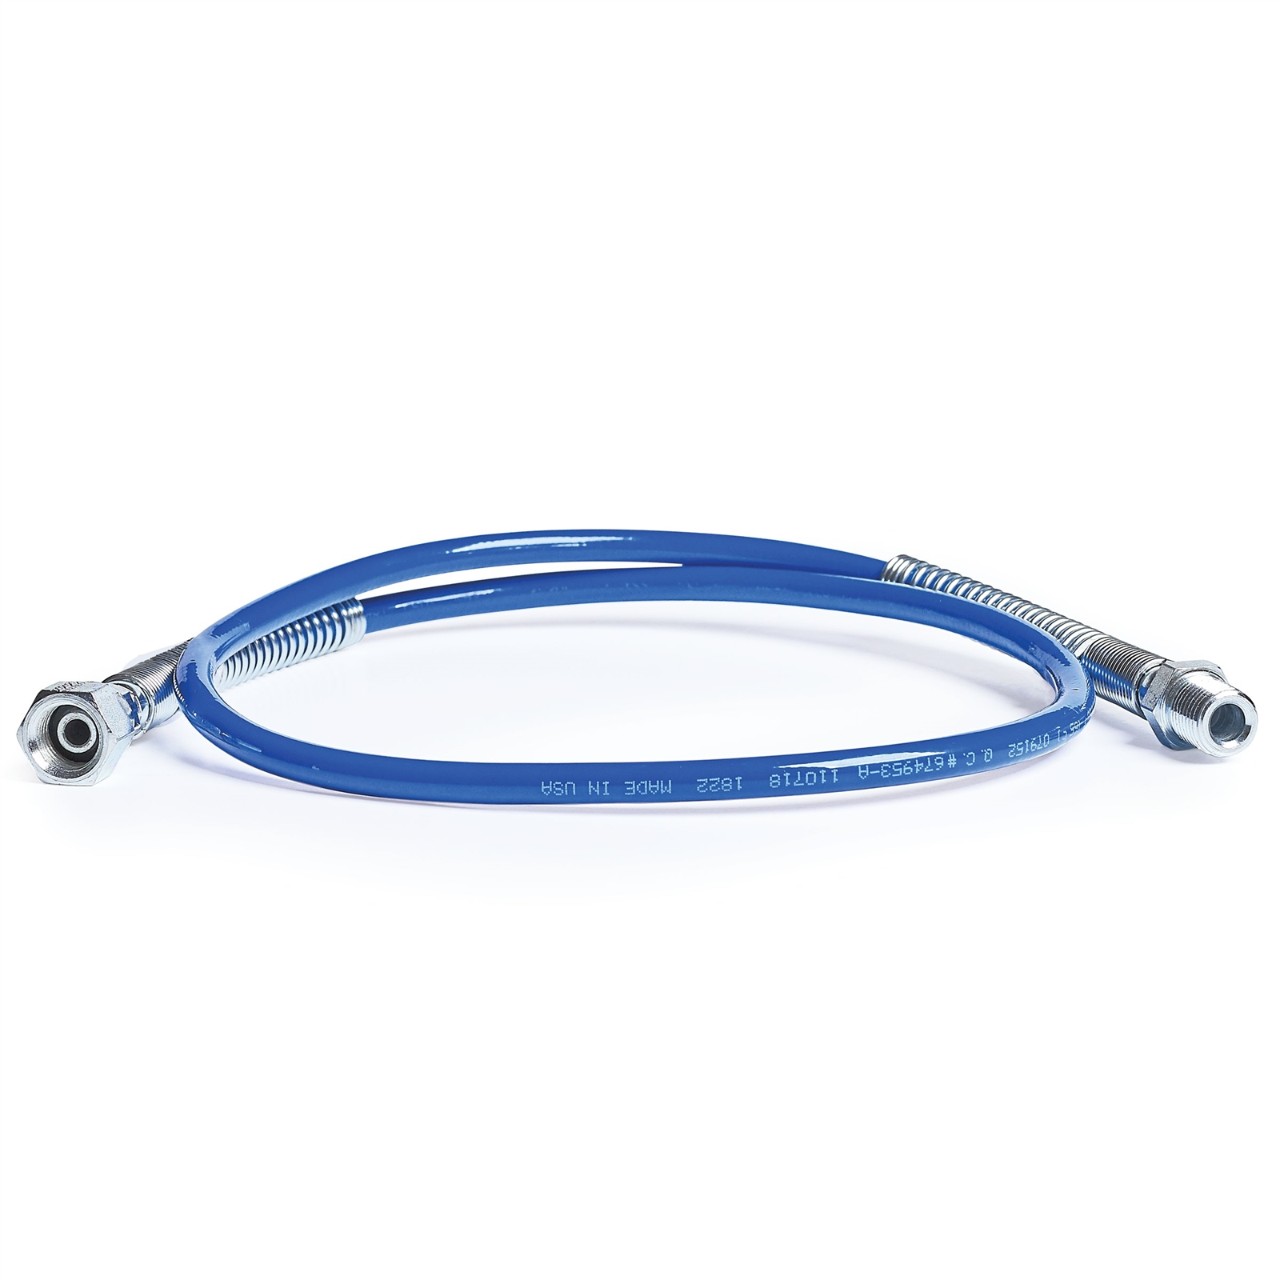 BlueMax II Airless Whip Hose, 1/8 in x 3 ft